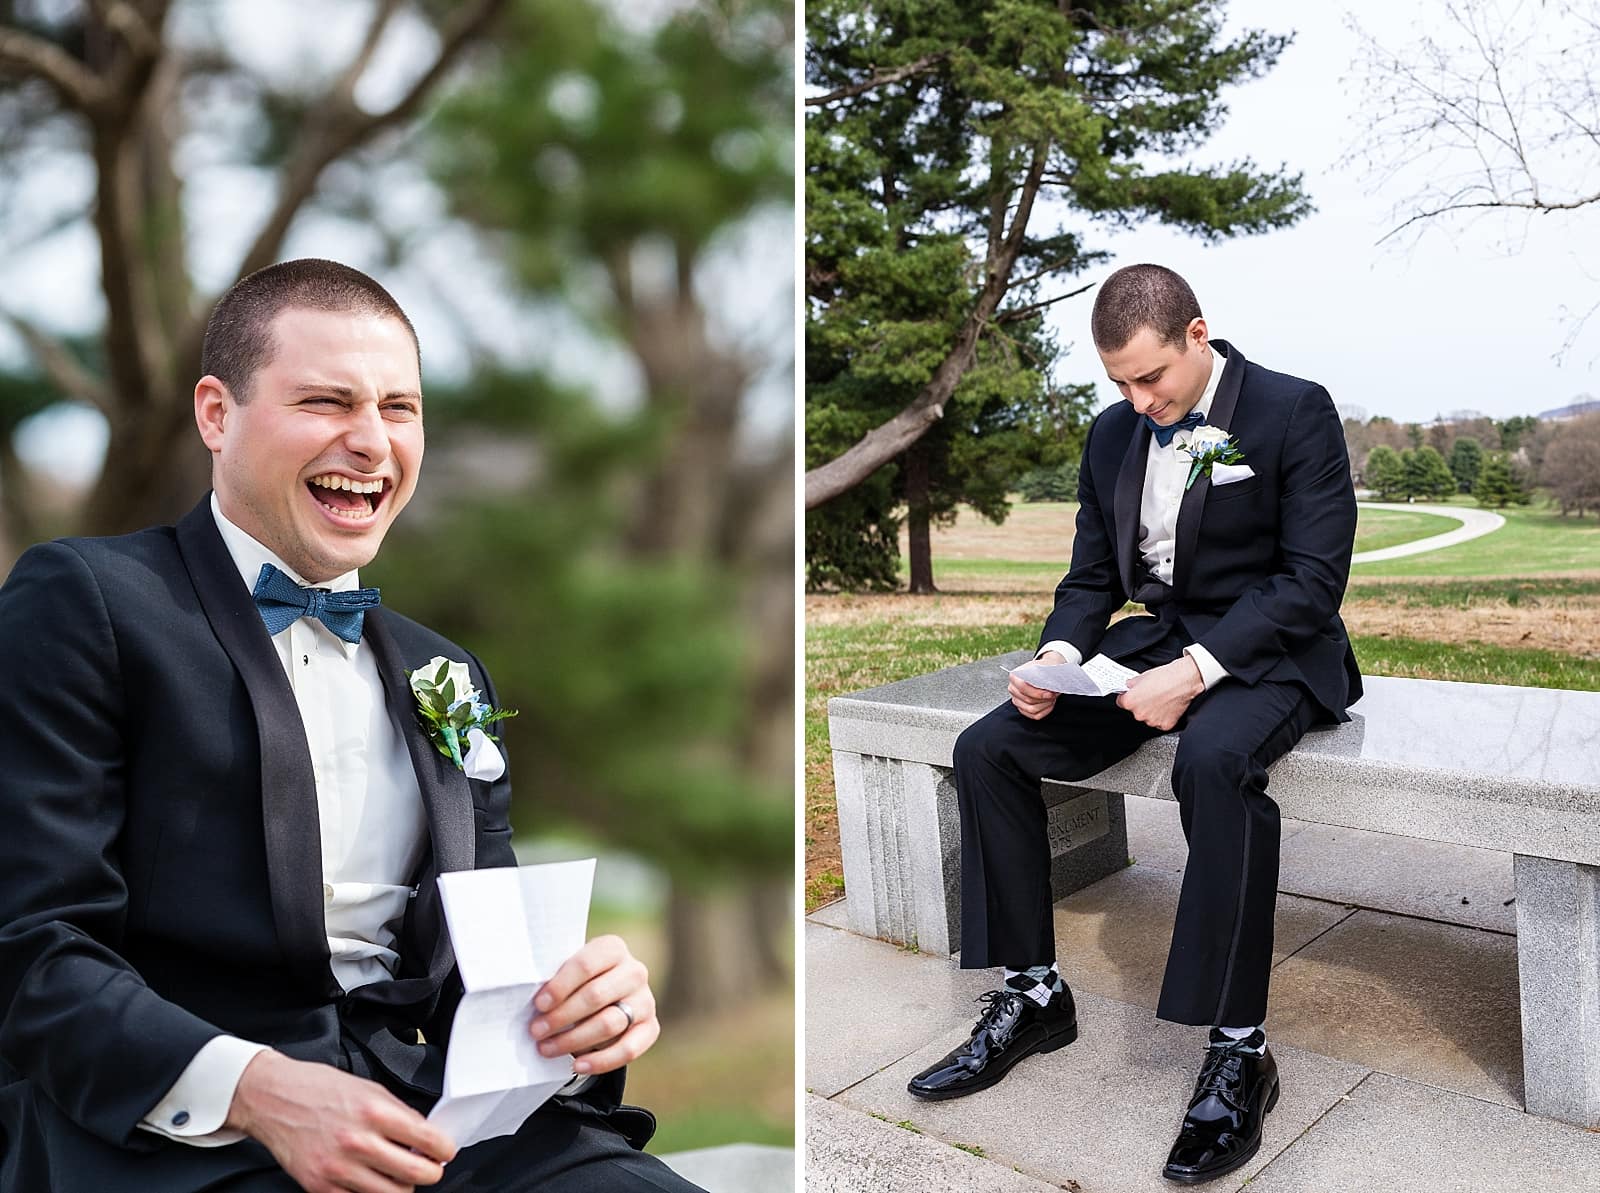 Groom cracks up while reading a letter from his bride at the memorial arch in Valley Forge National Park.